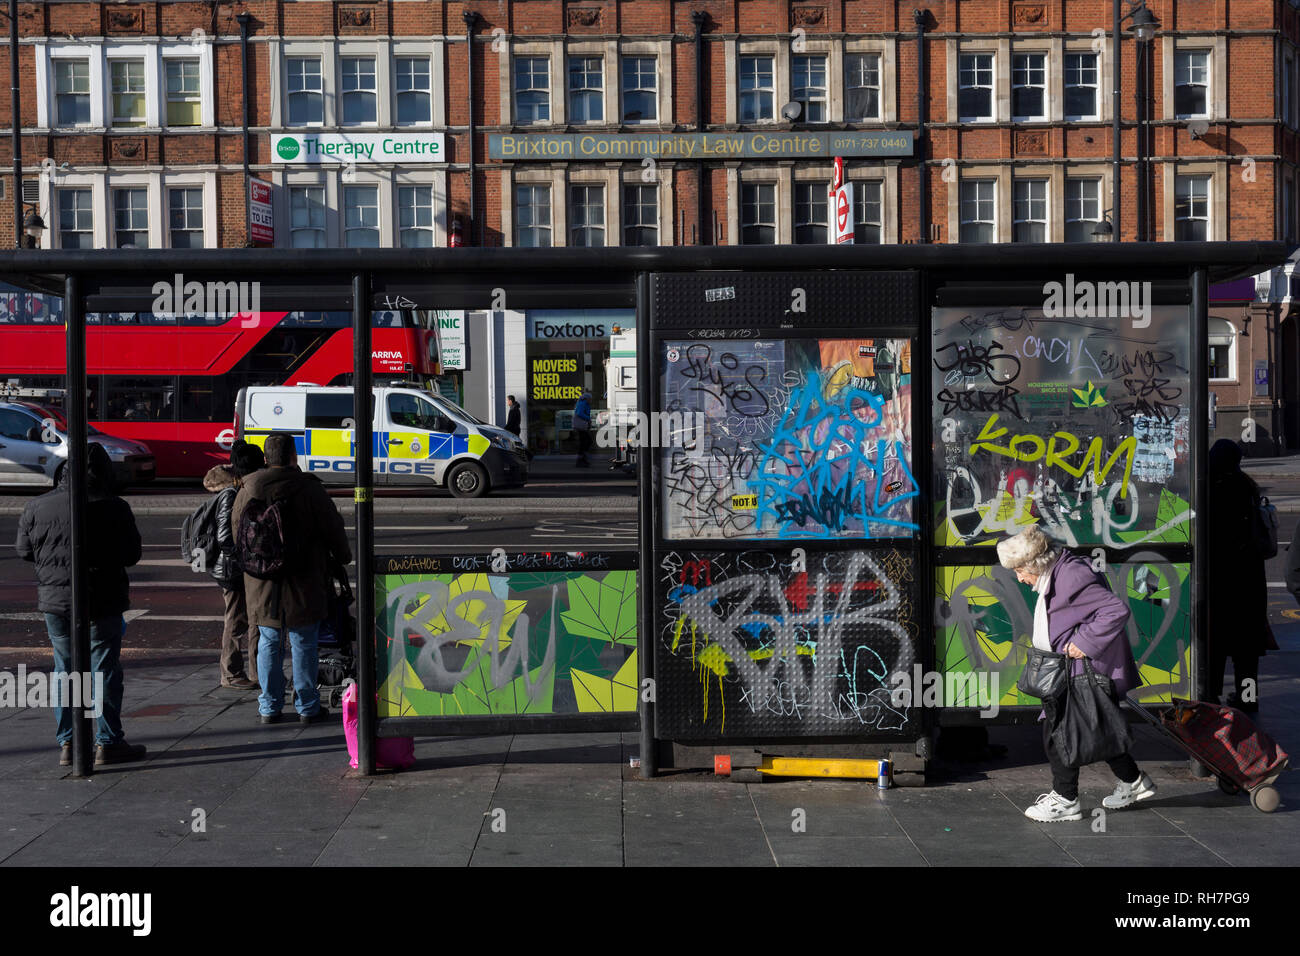 An elderly lady struggles with her shopping trolley past a graffiti-covered bus stop in Brixton, on 30th january 2019, in Lambeth, south London, England. Stock Photo